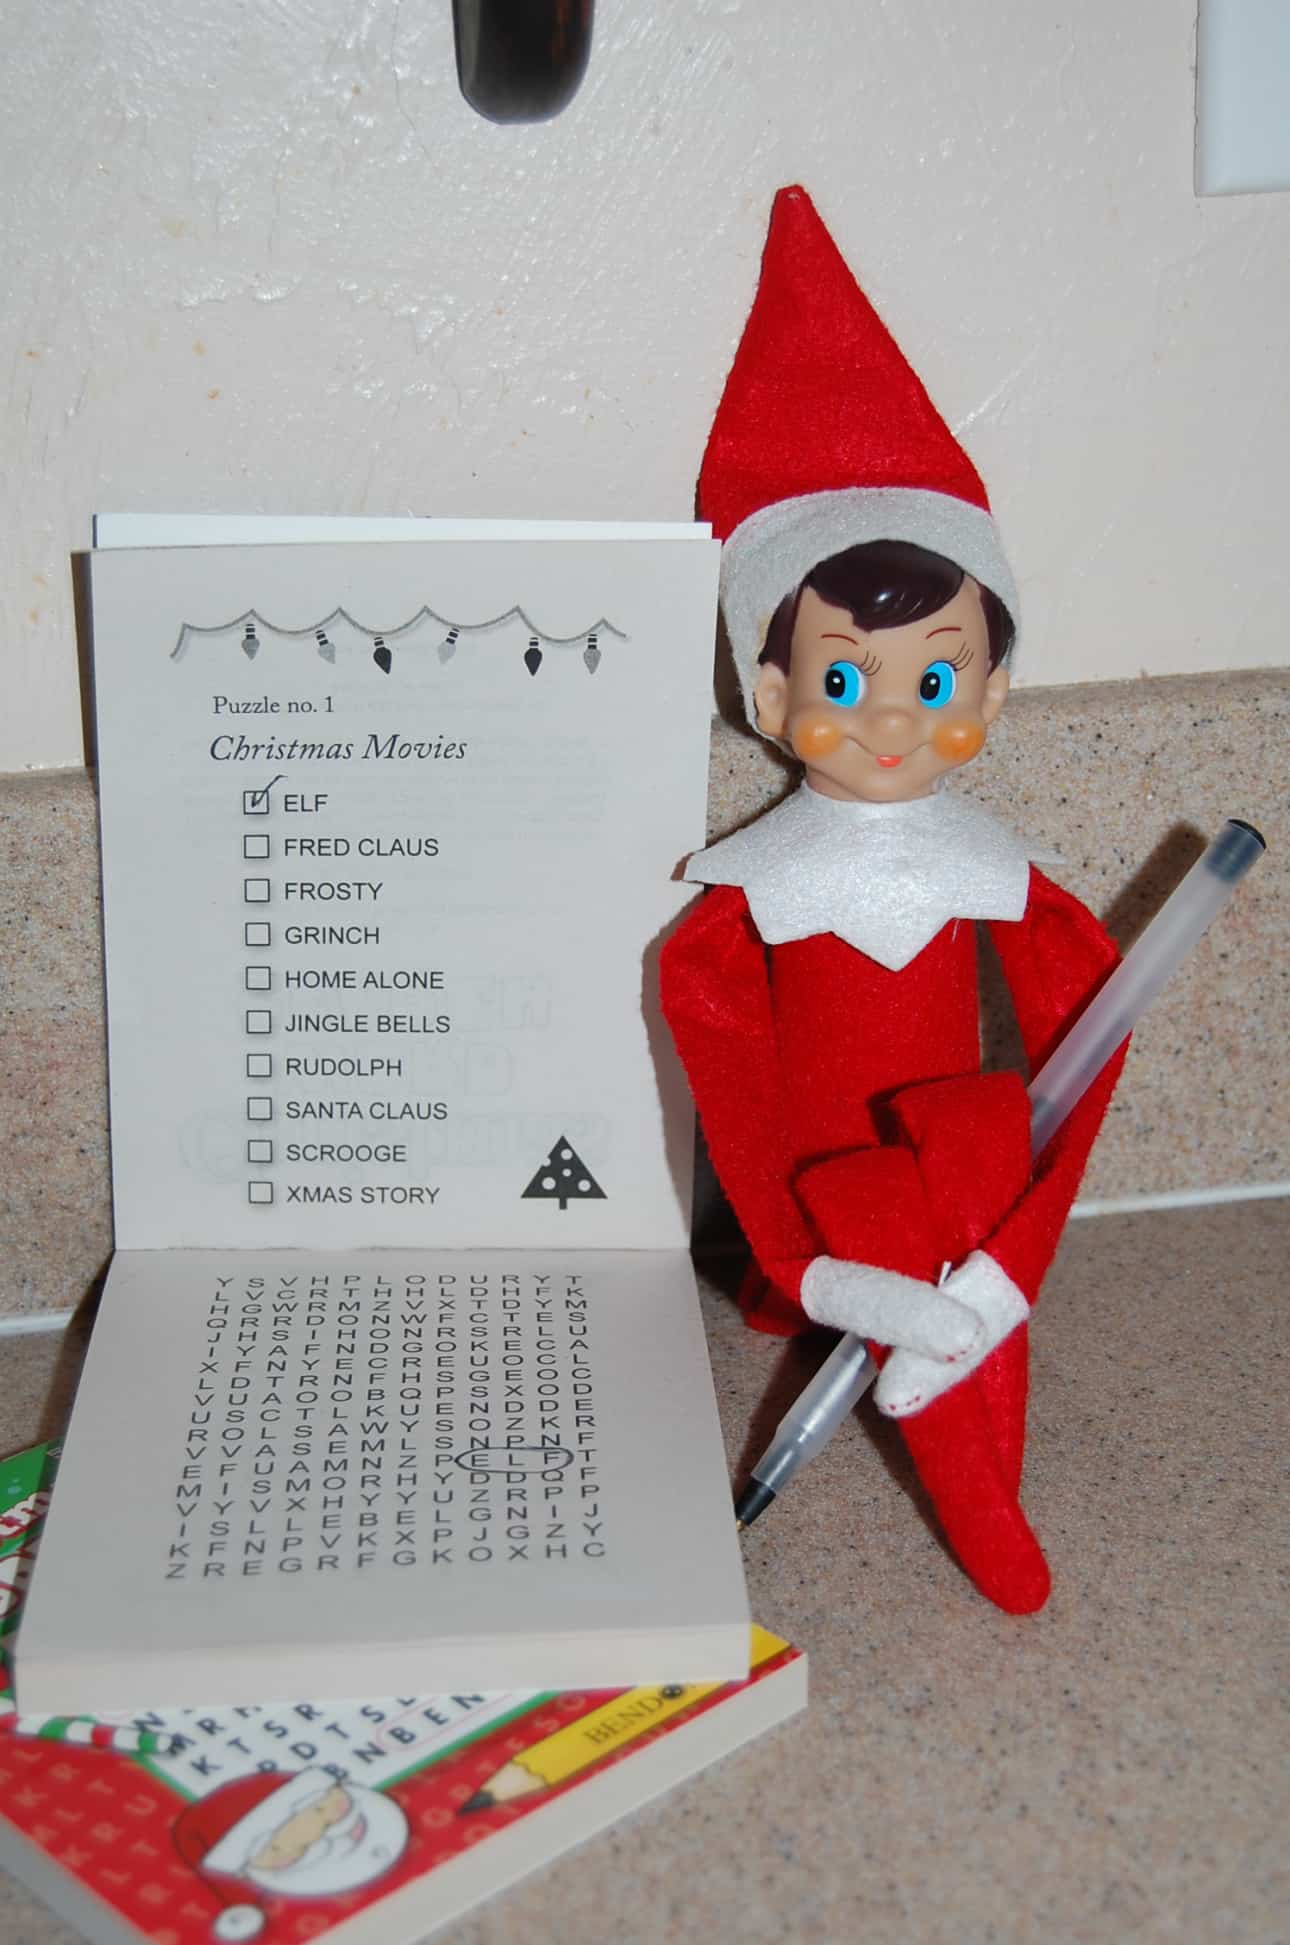 91. Elfie and the Christmas Crossword Puzzle